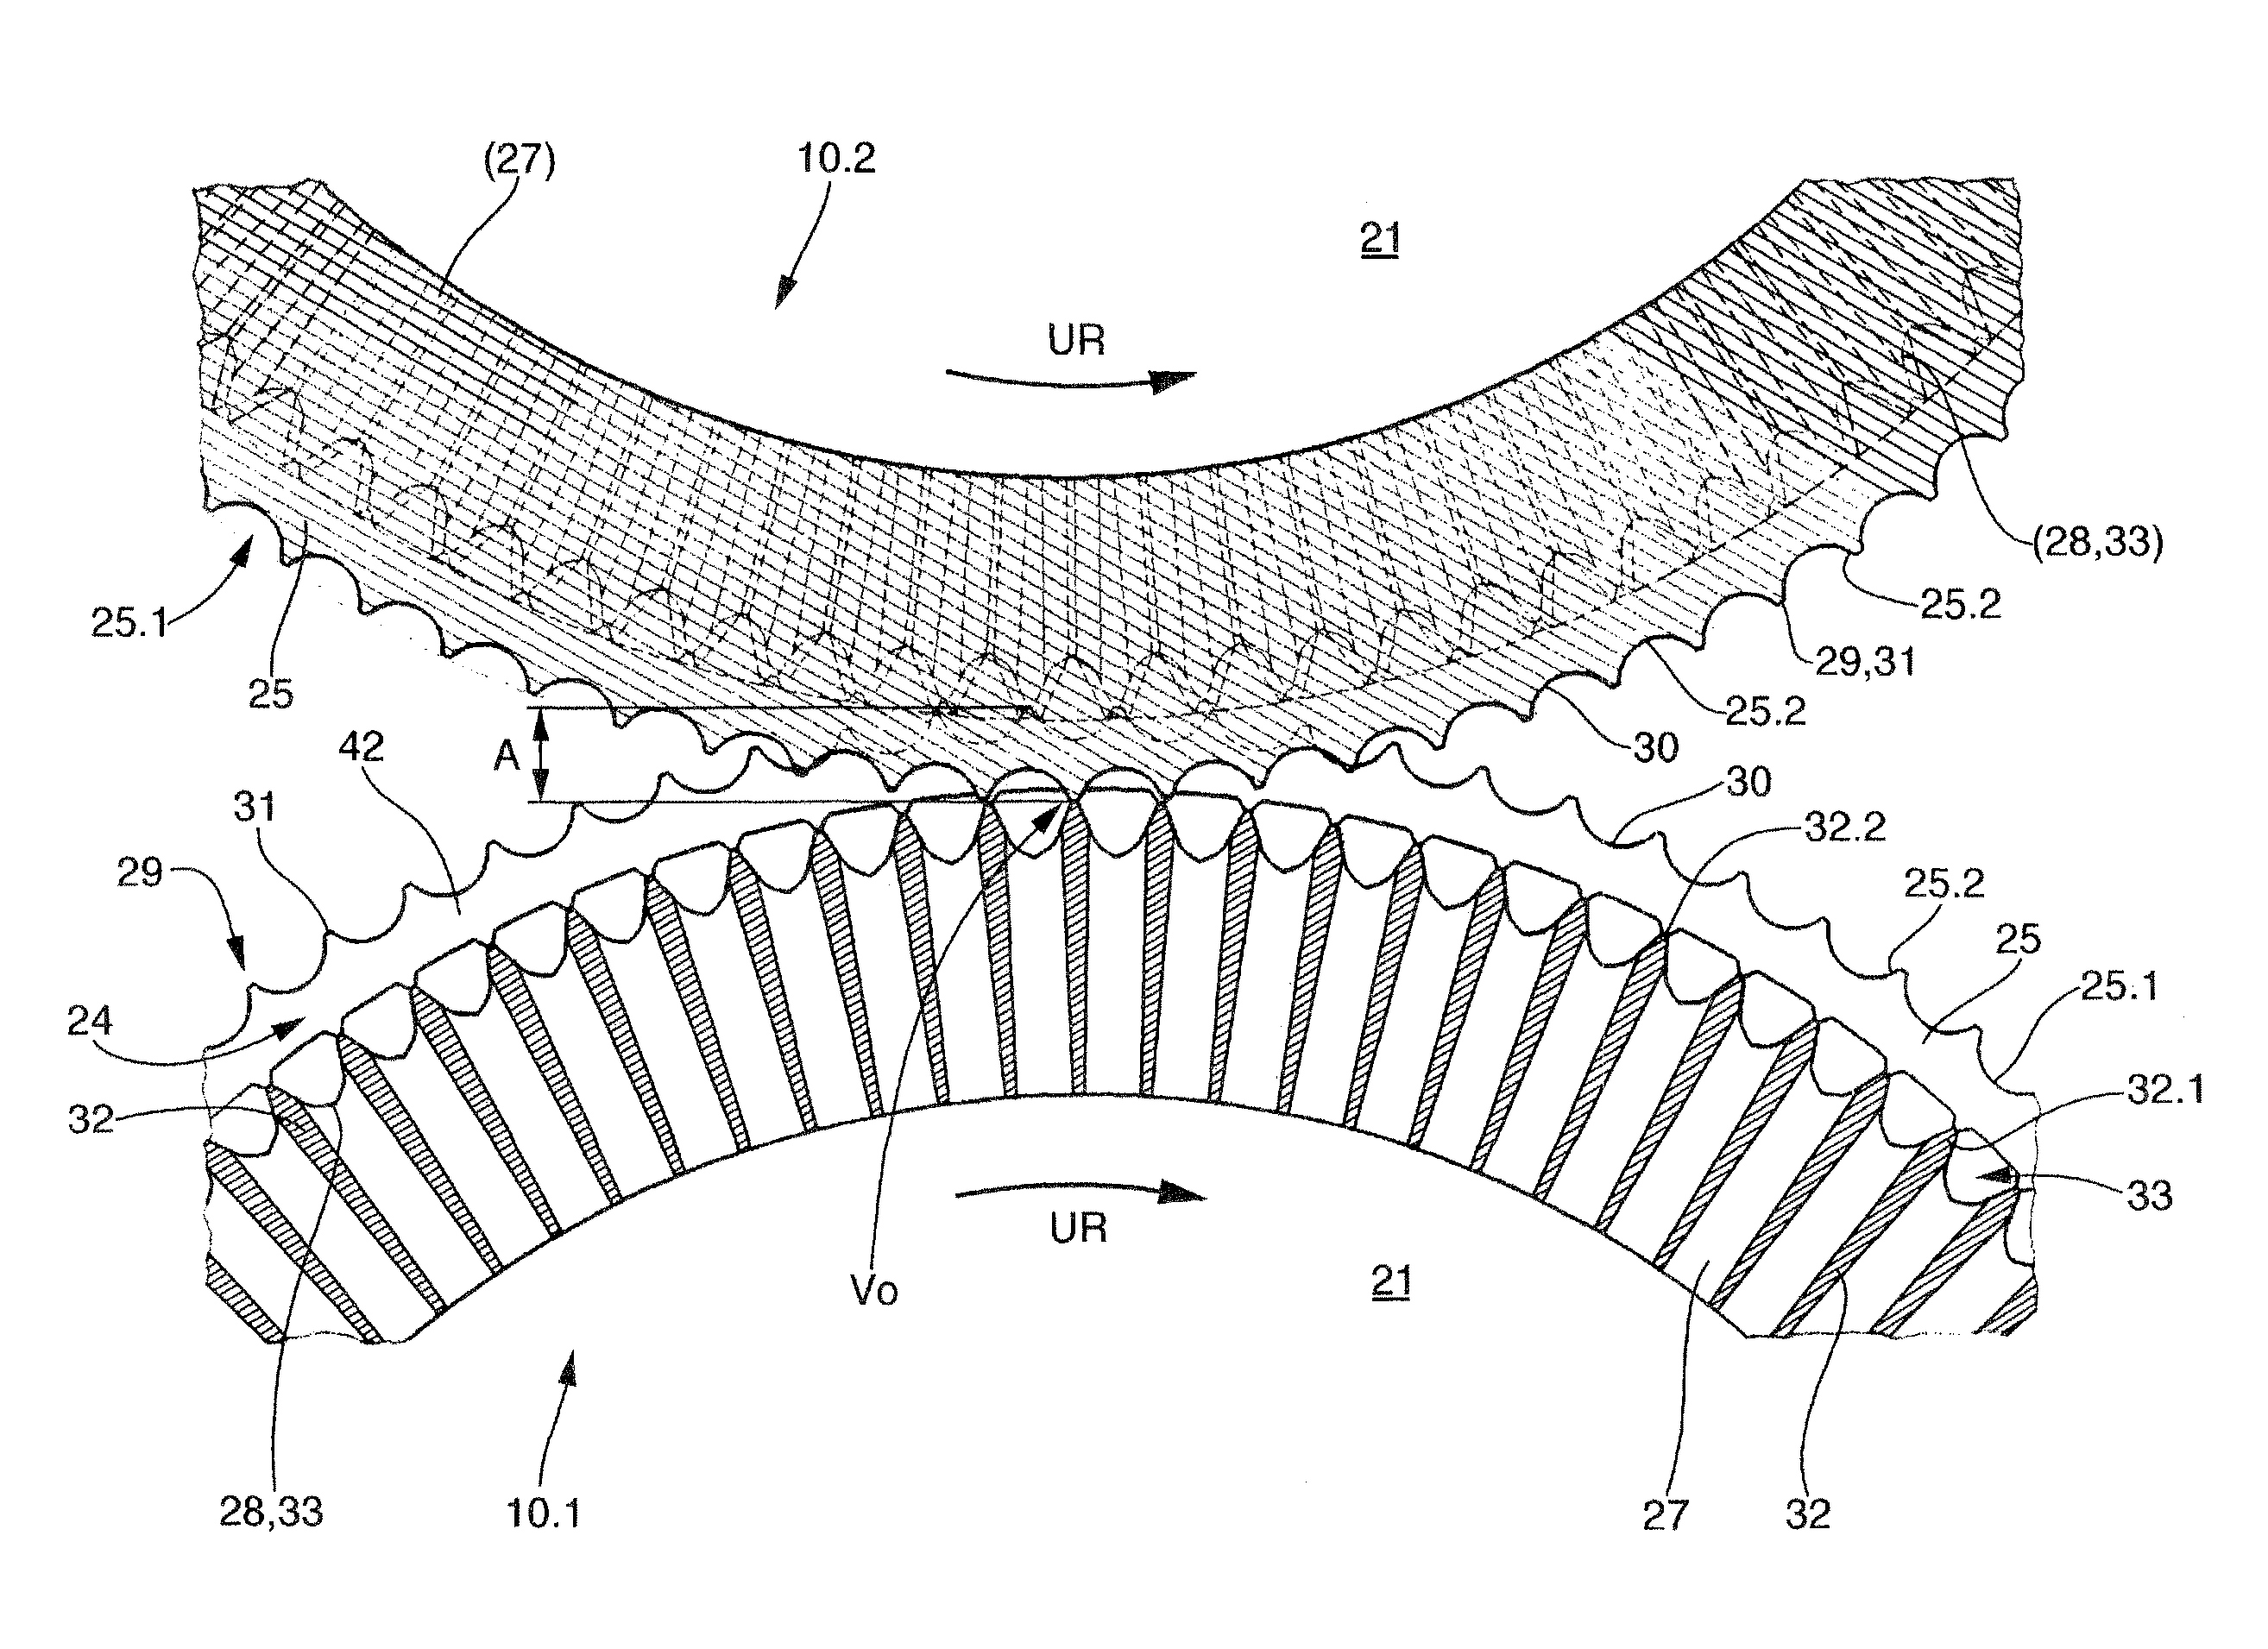 Apparatus for compacting fibrous plant material, especially for compacting stalk material